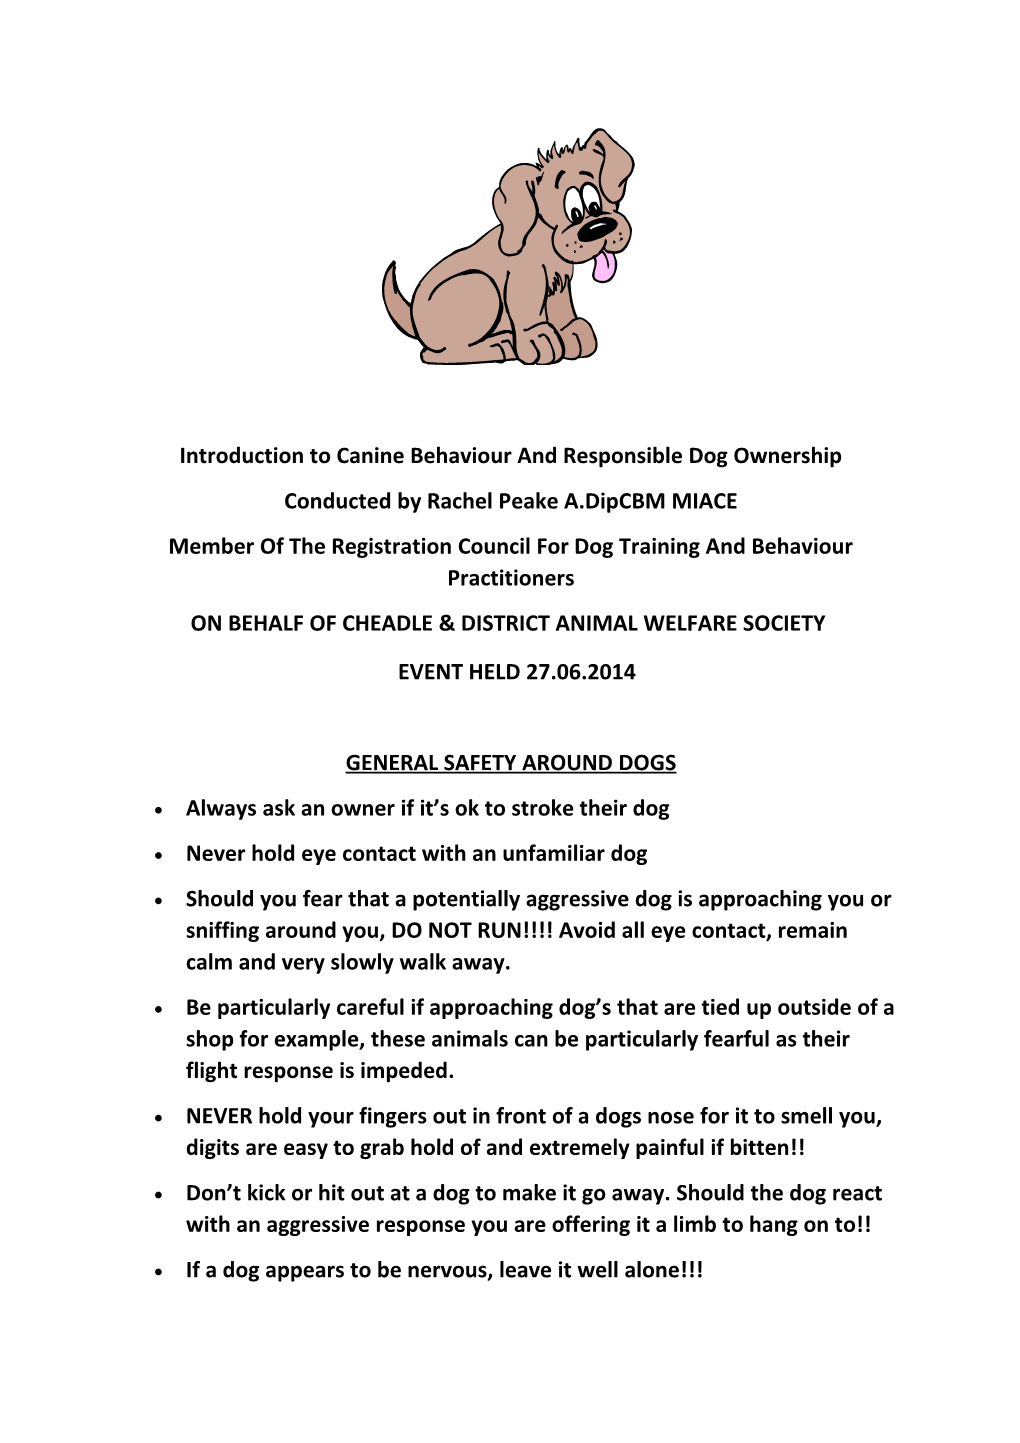 Introduction to Canine Behaviour and Responsible Dog Ownership